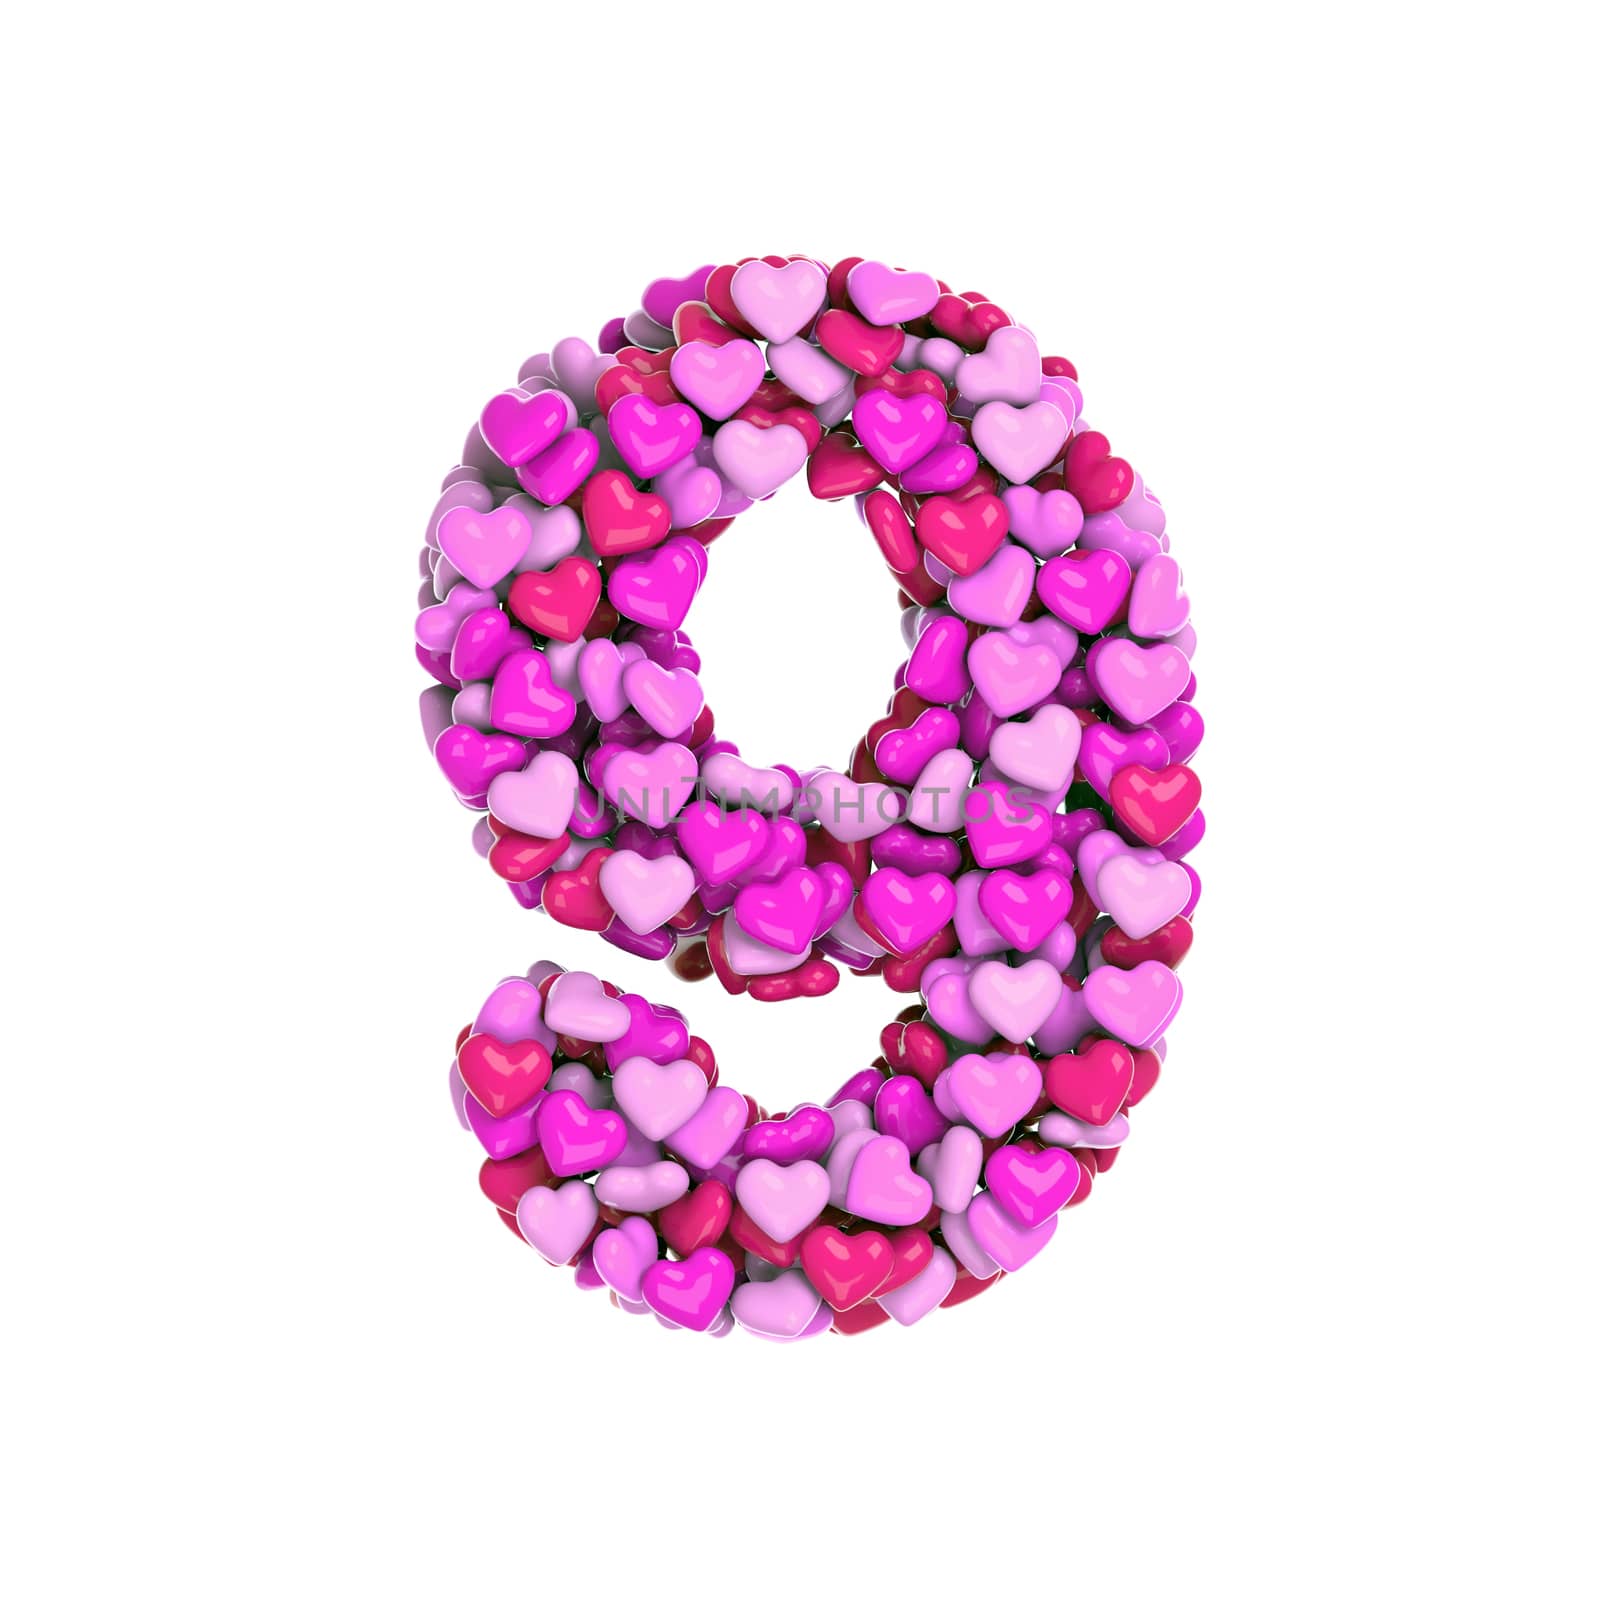 Valentine number 9 -  3d pink hearts digit - Love, passion or wedding concept by chrisroll